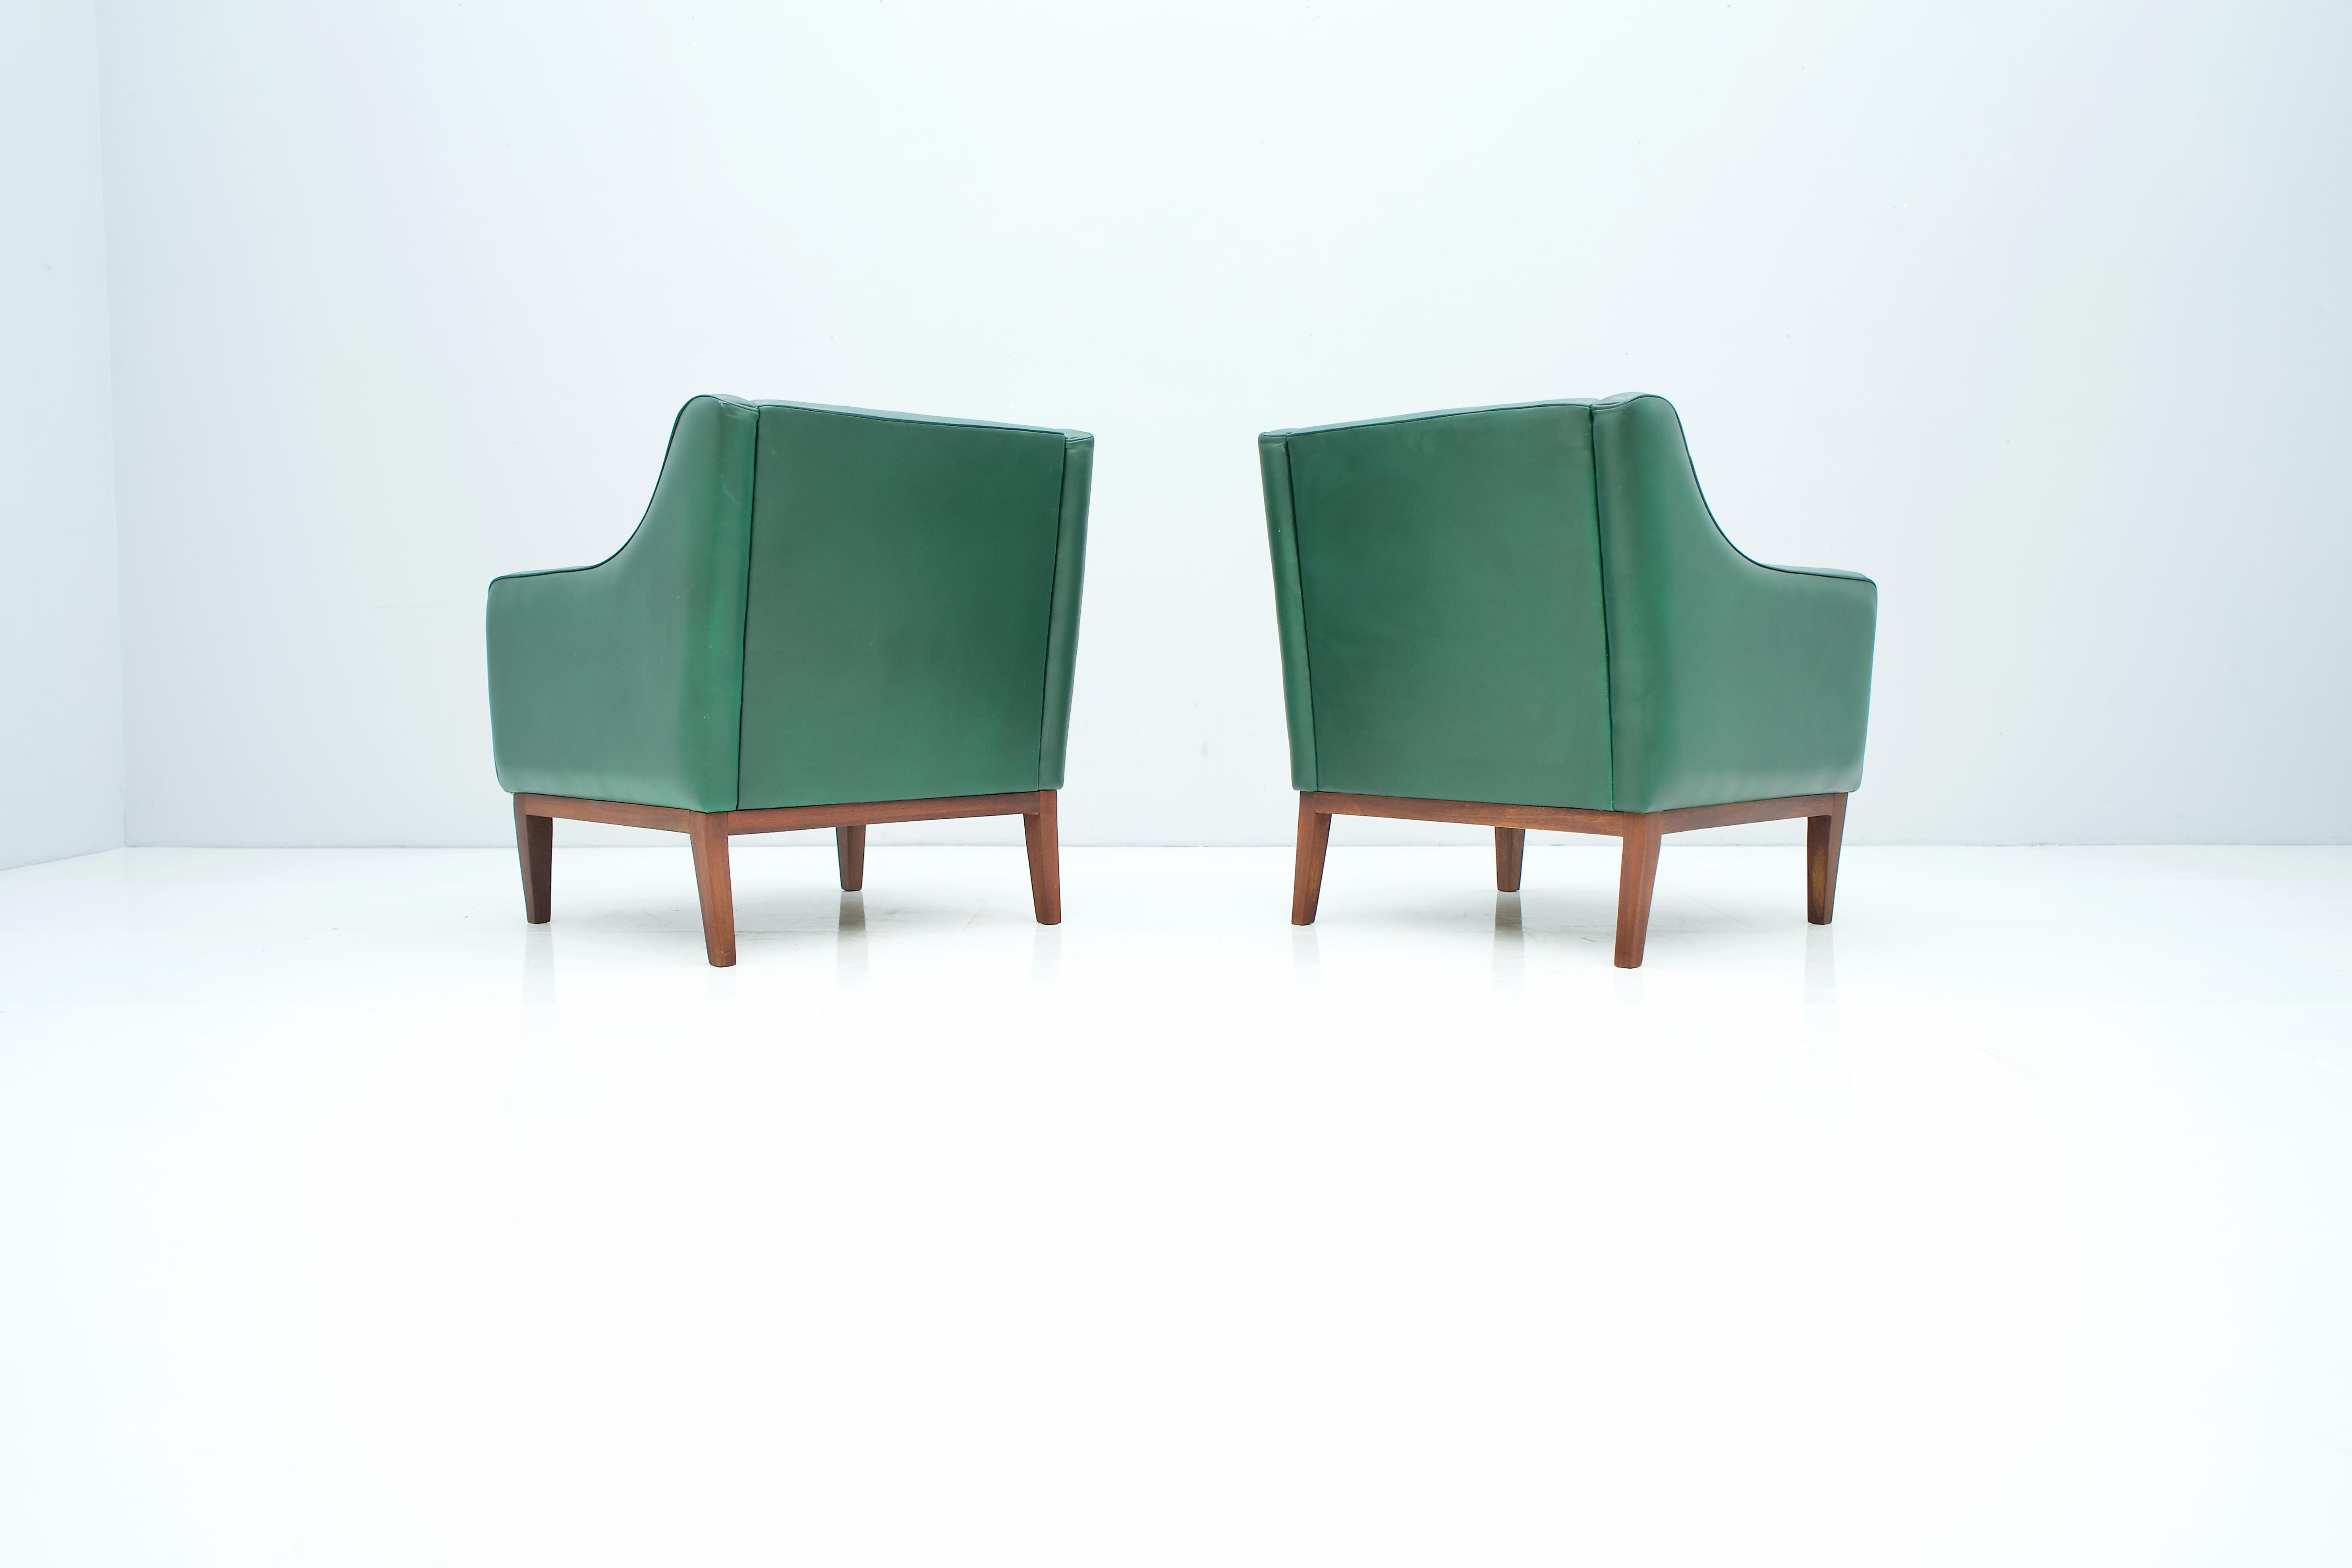 Pair of Italian Lounge Chairs in Green Leather, 1958 For Sale 4